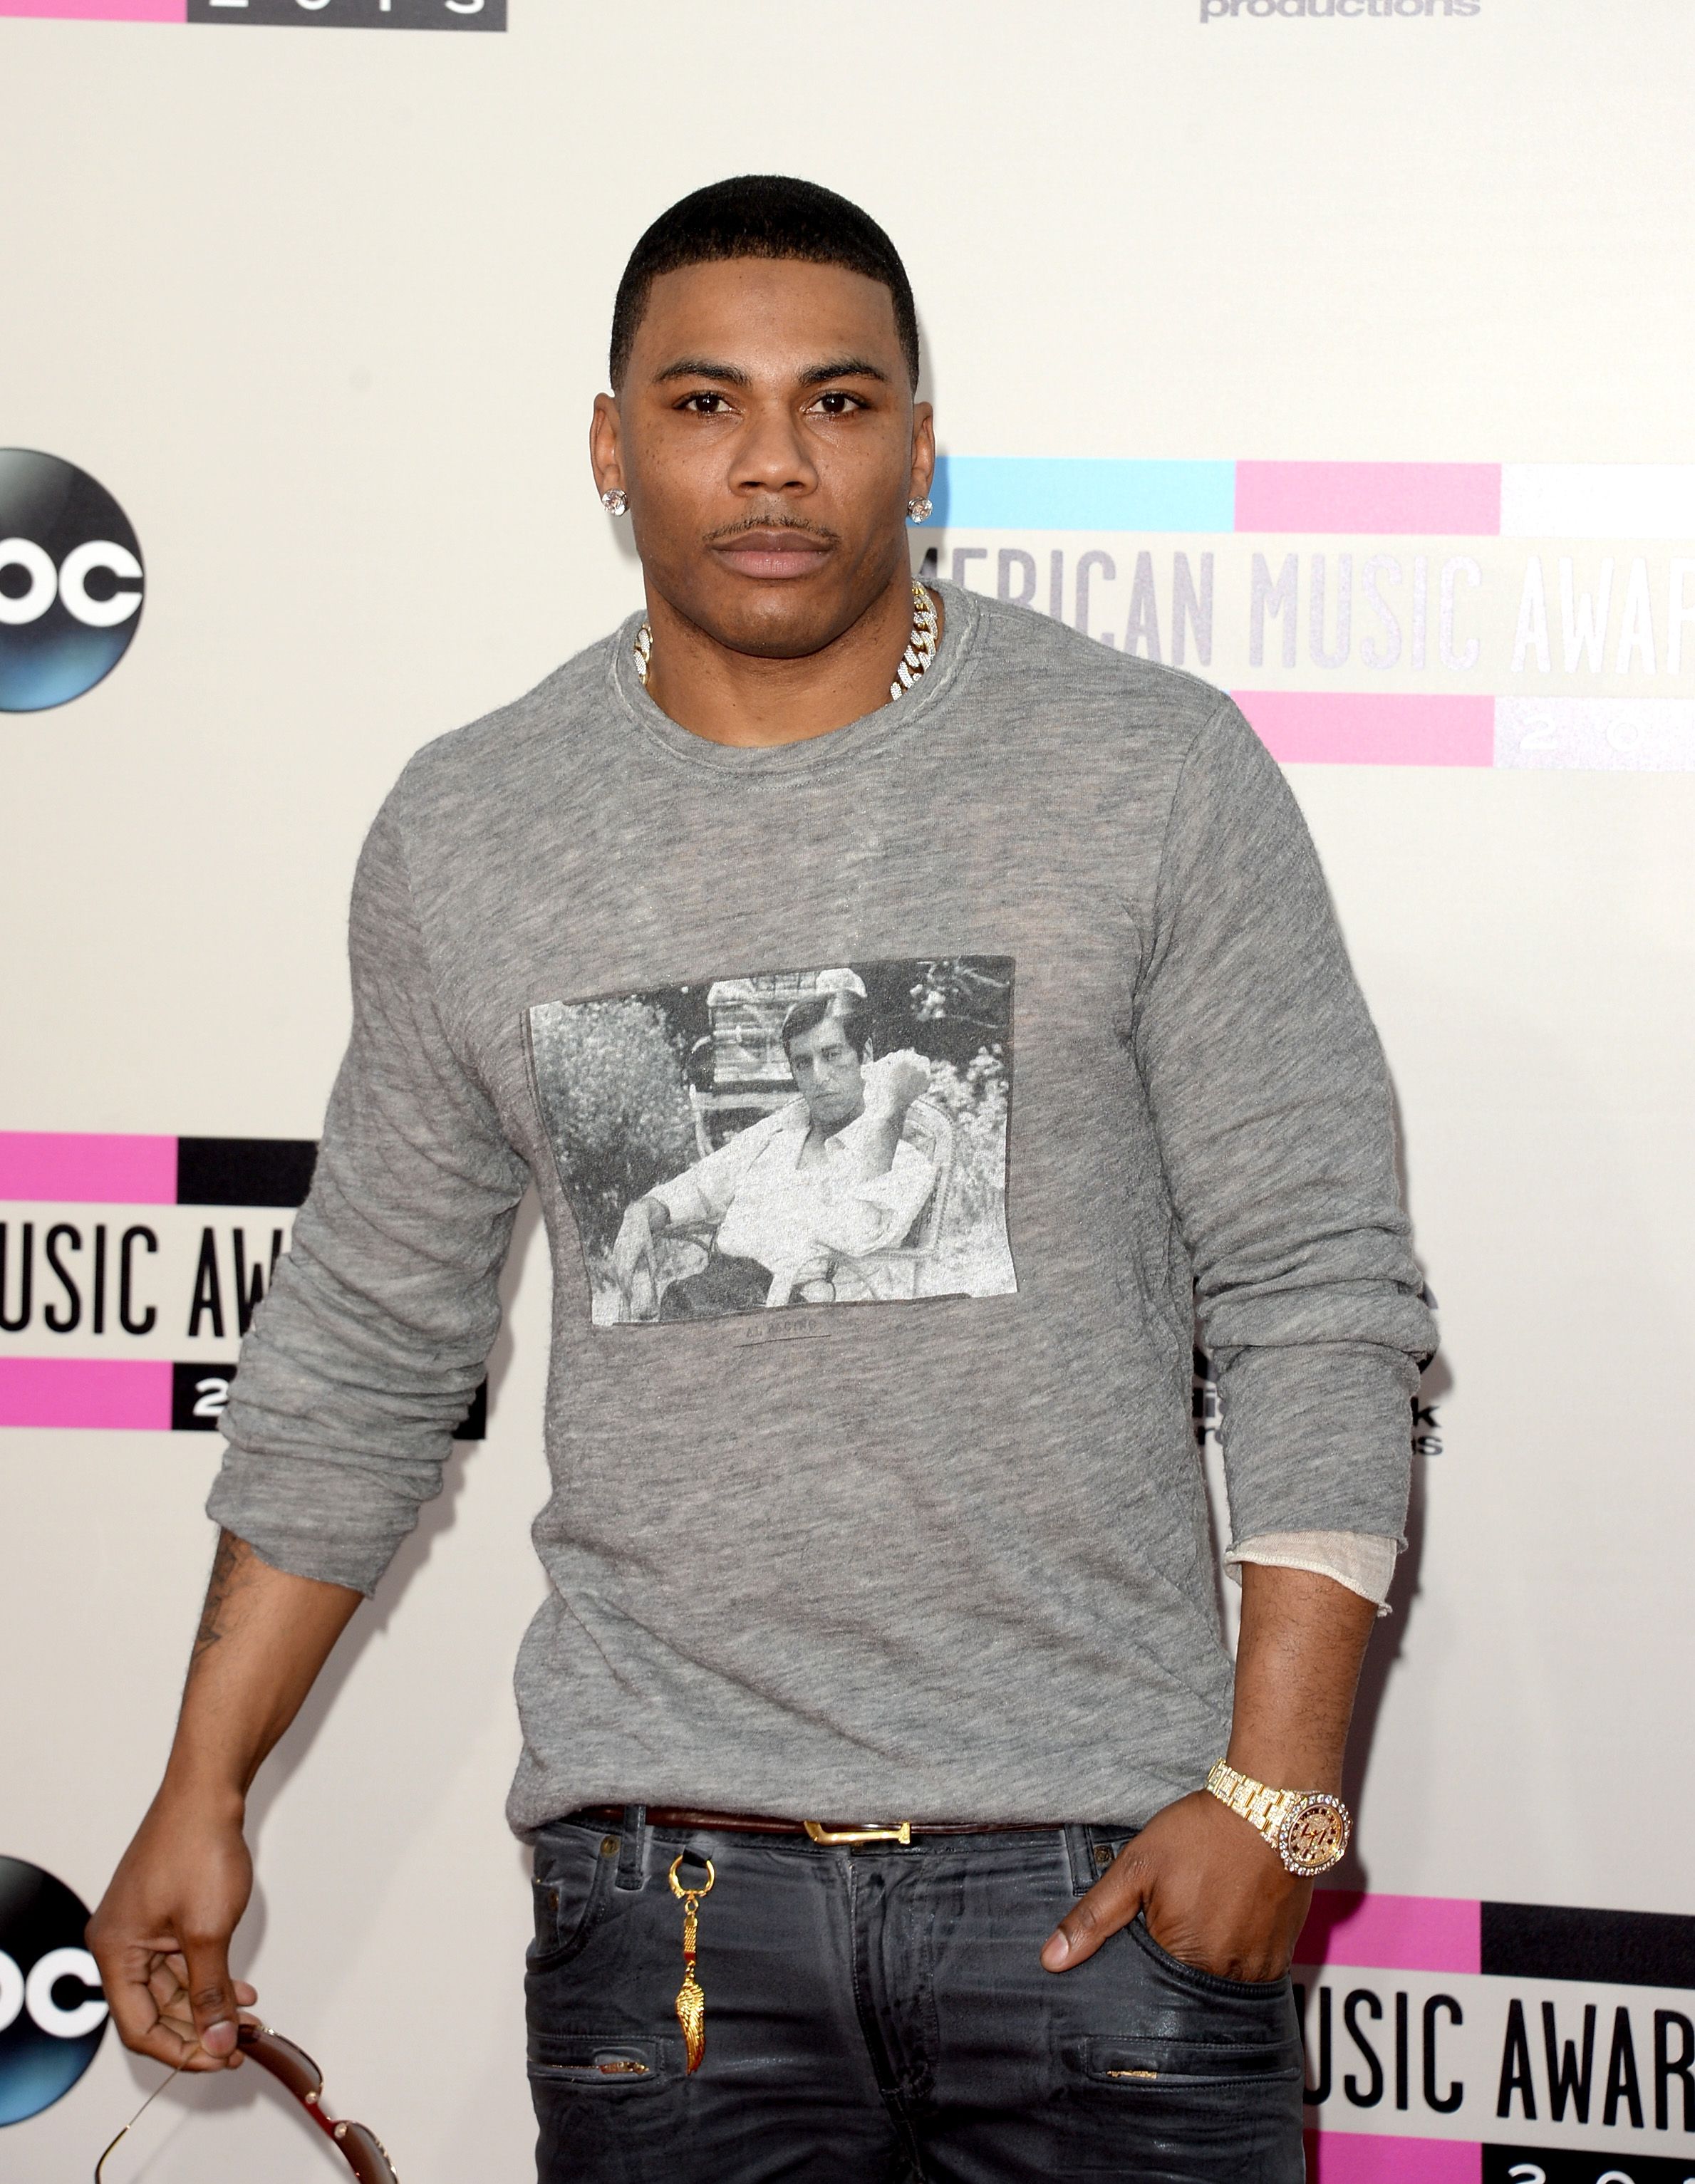 Nelly during the 2013 American Music Awards at Nokia Theatre L.A. Live on November 24, 2013 in Los Angeles, California. | Source: Getty Images